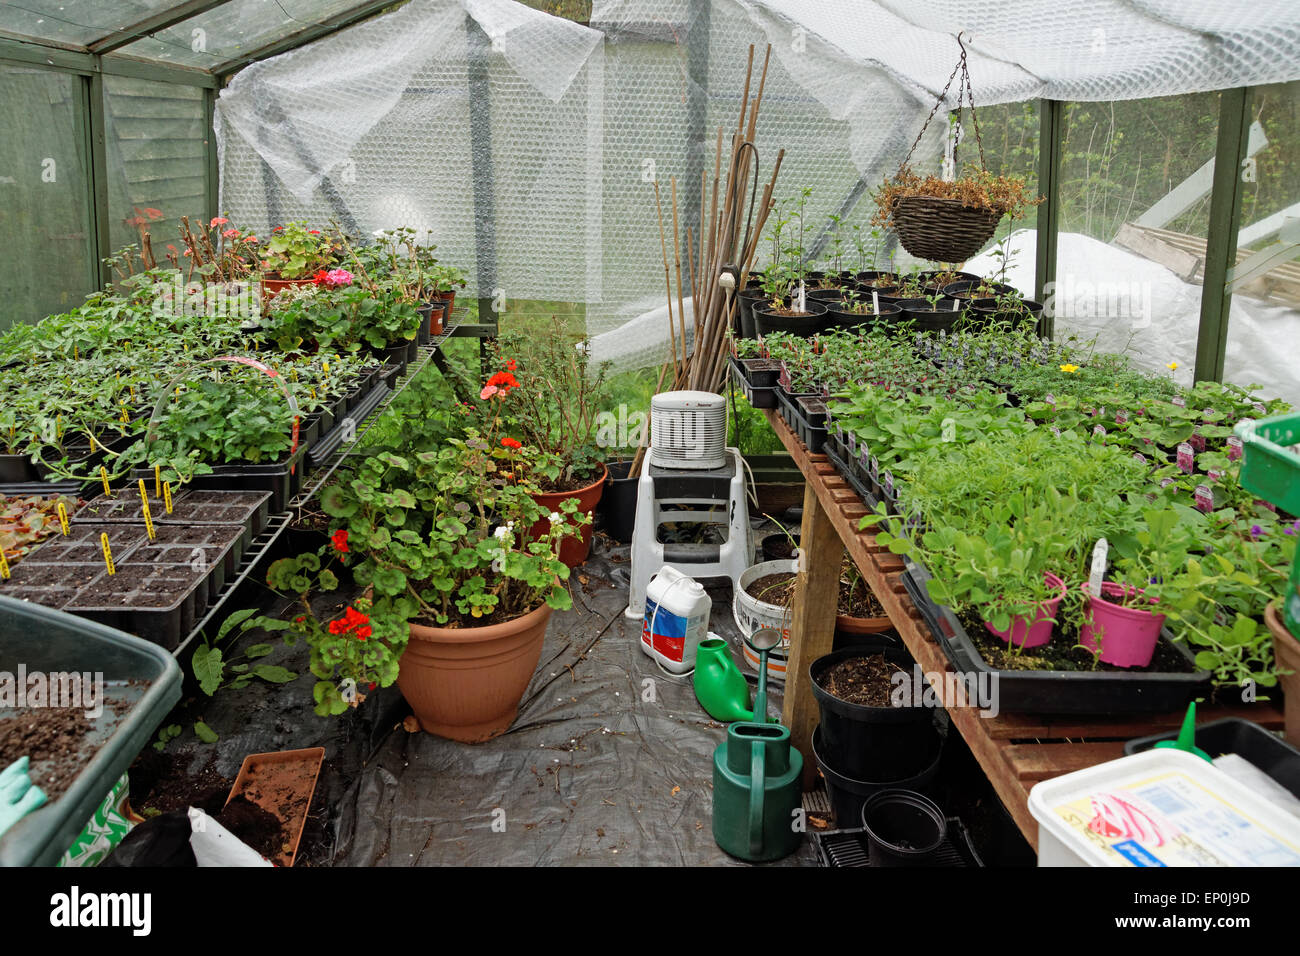 Young seedlings in greenhouse on staging Stock Photo